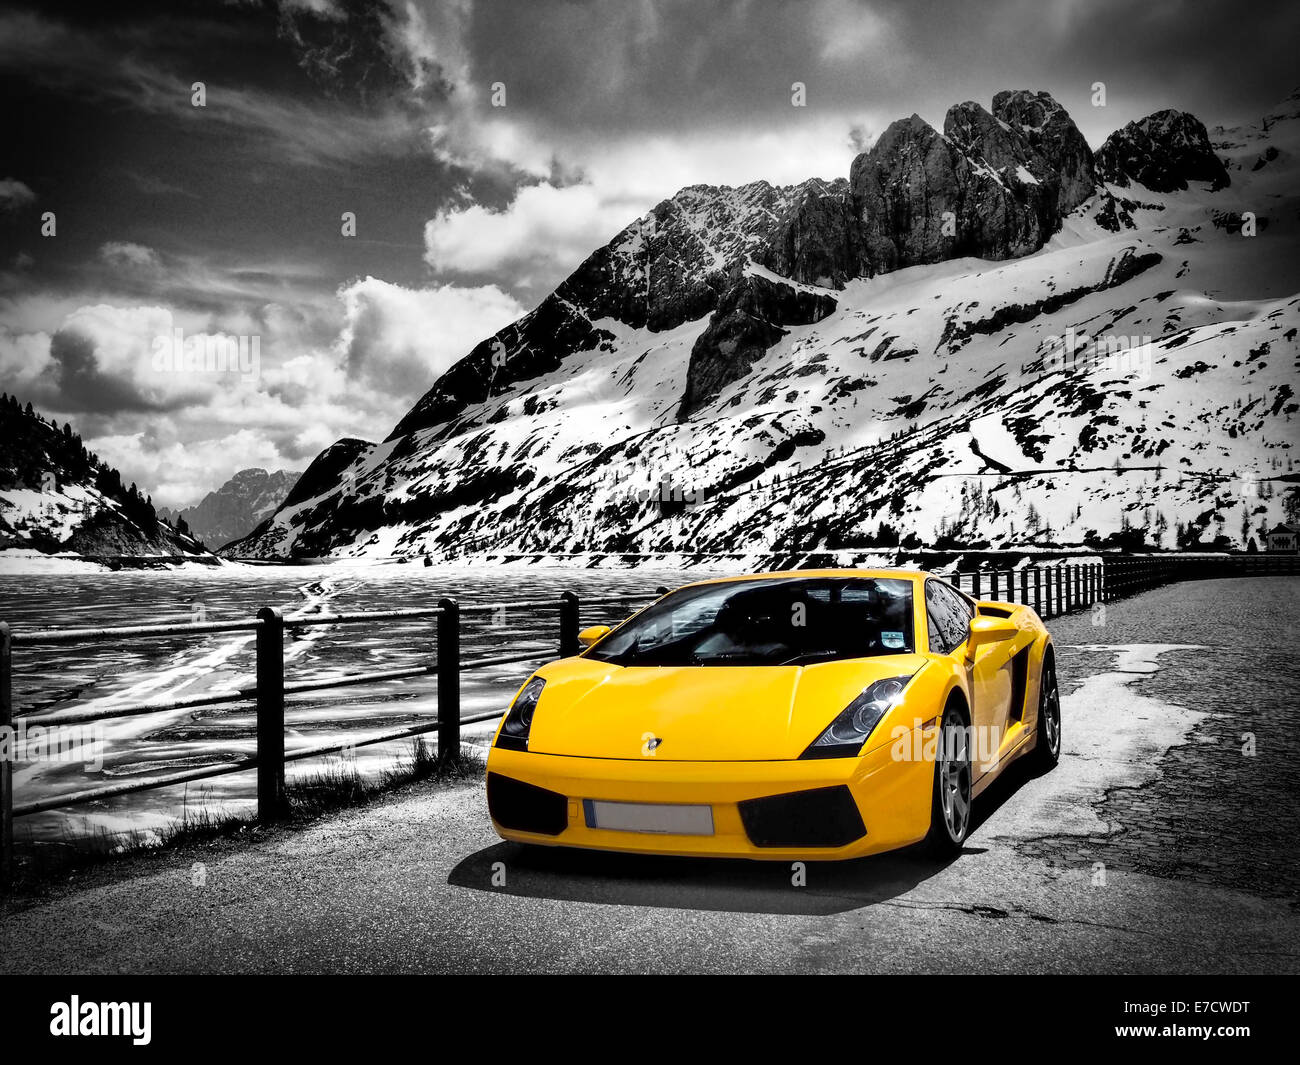 Italian supercar next to Lago di Fedaia lake surrounded by the snow and ice capped Dolomites mountains in Italy. Stock Photo